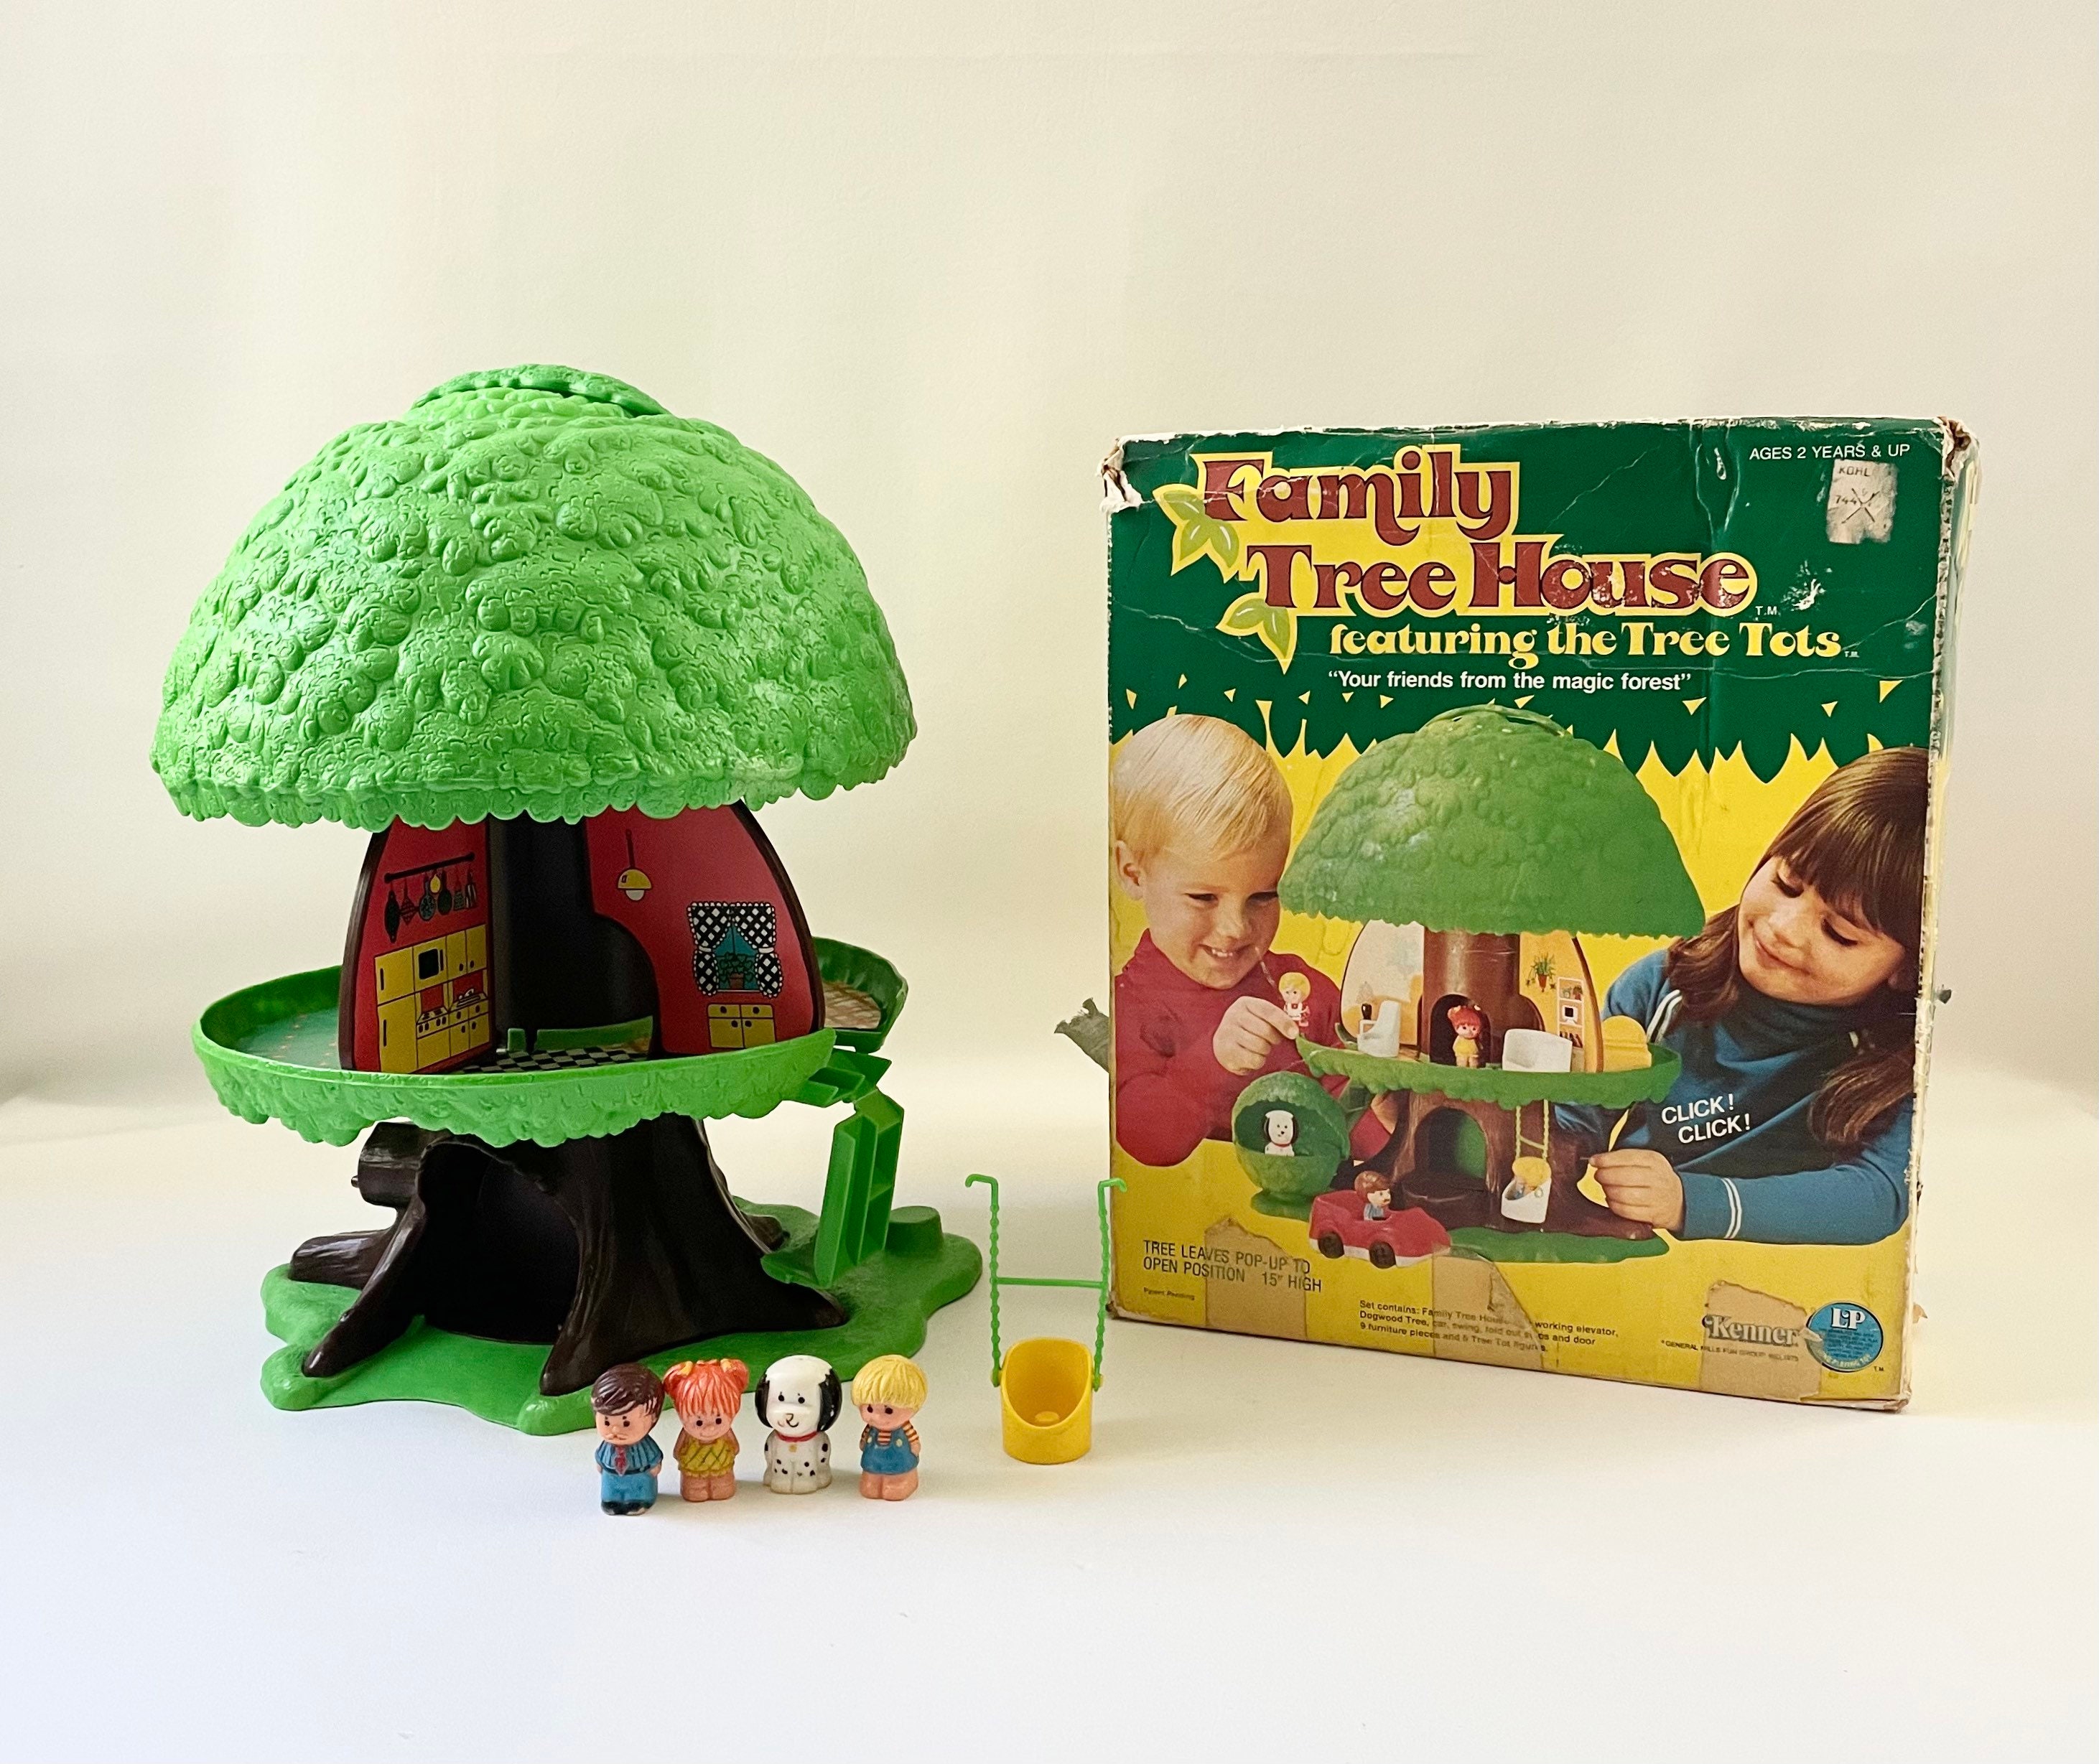 Details about   VINTAGE 1975 GENERAL MILLS KENNER TREE TOTS FAMILY TREE HOUSE PLAYSET W/ FIGURES 